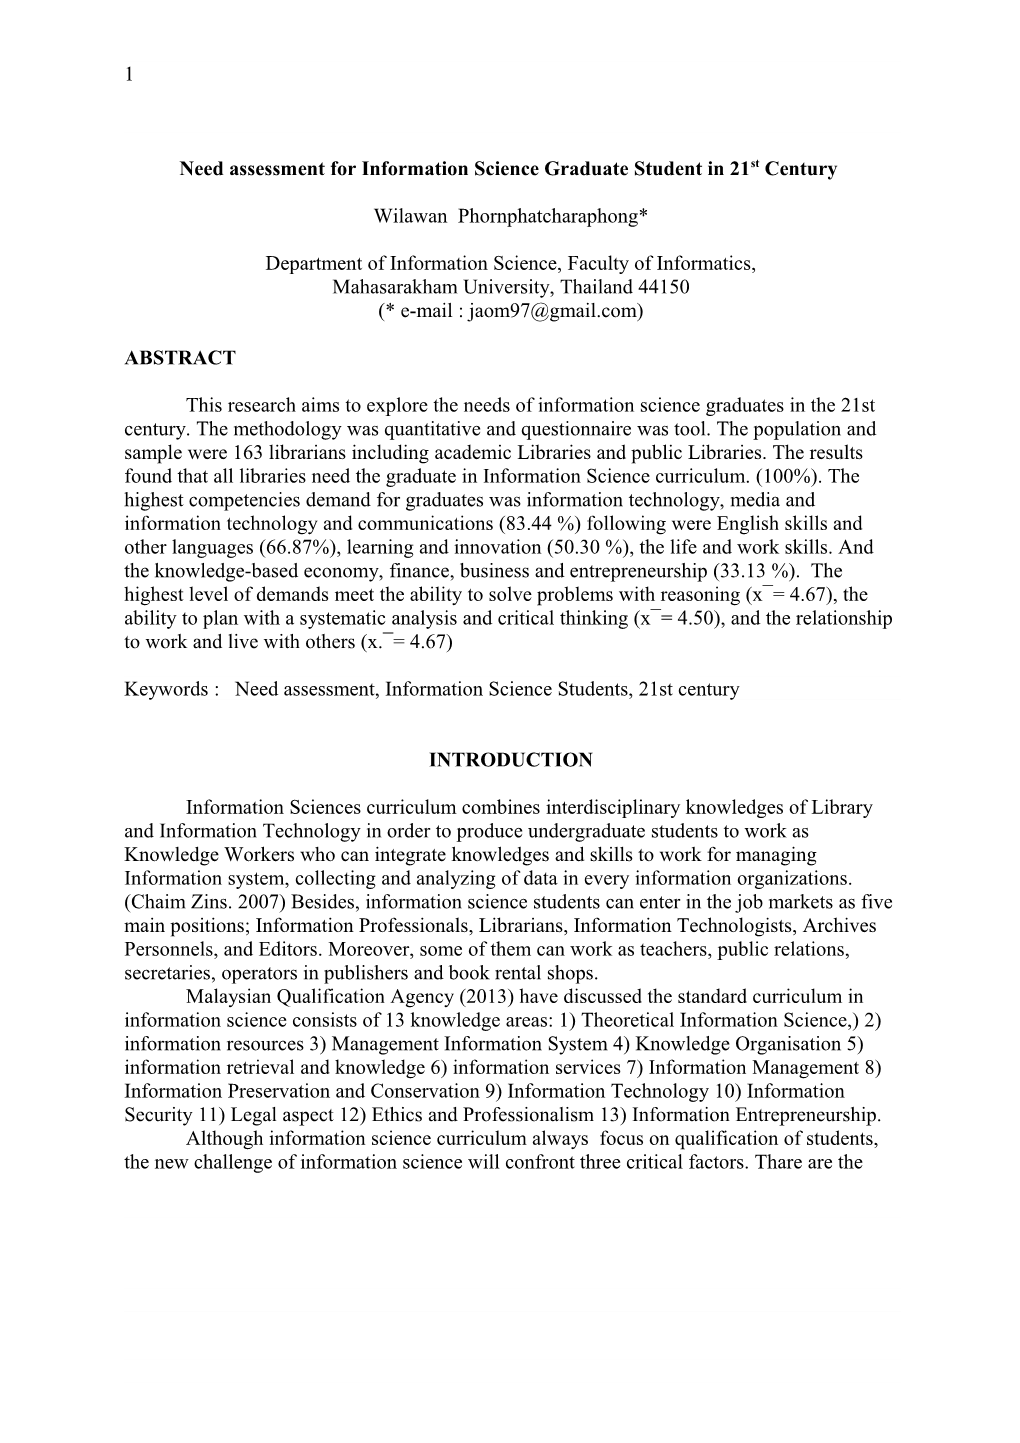 Need Assessment for Information Science Graduate Student in 21St Century